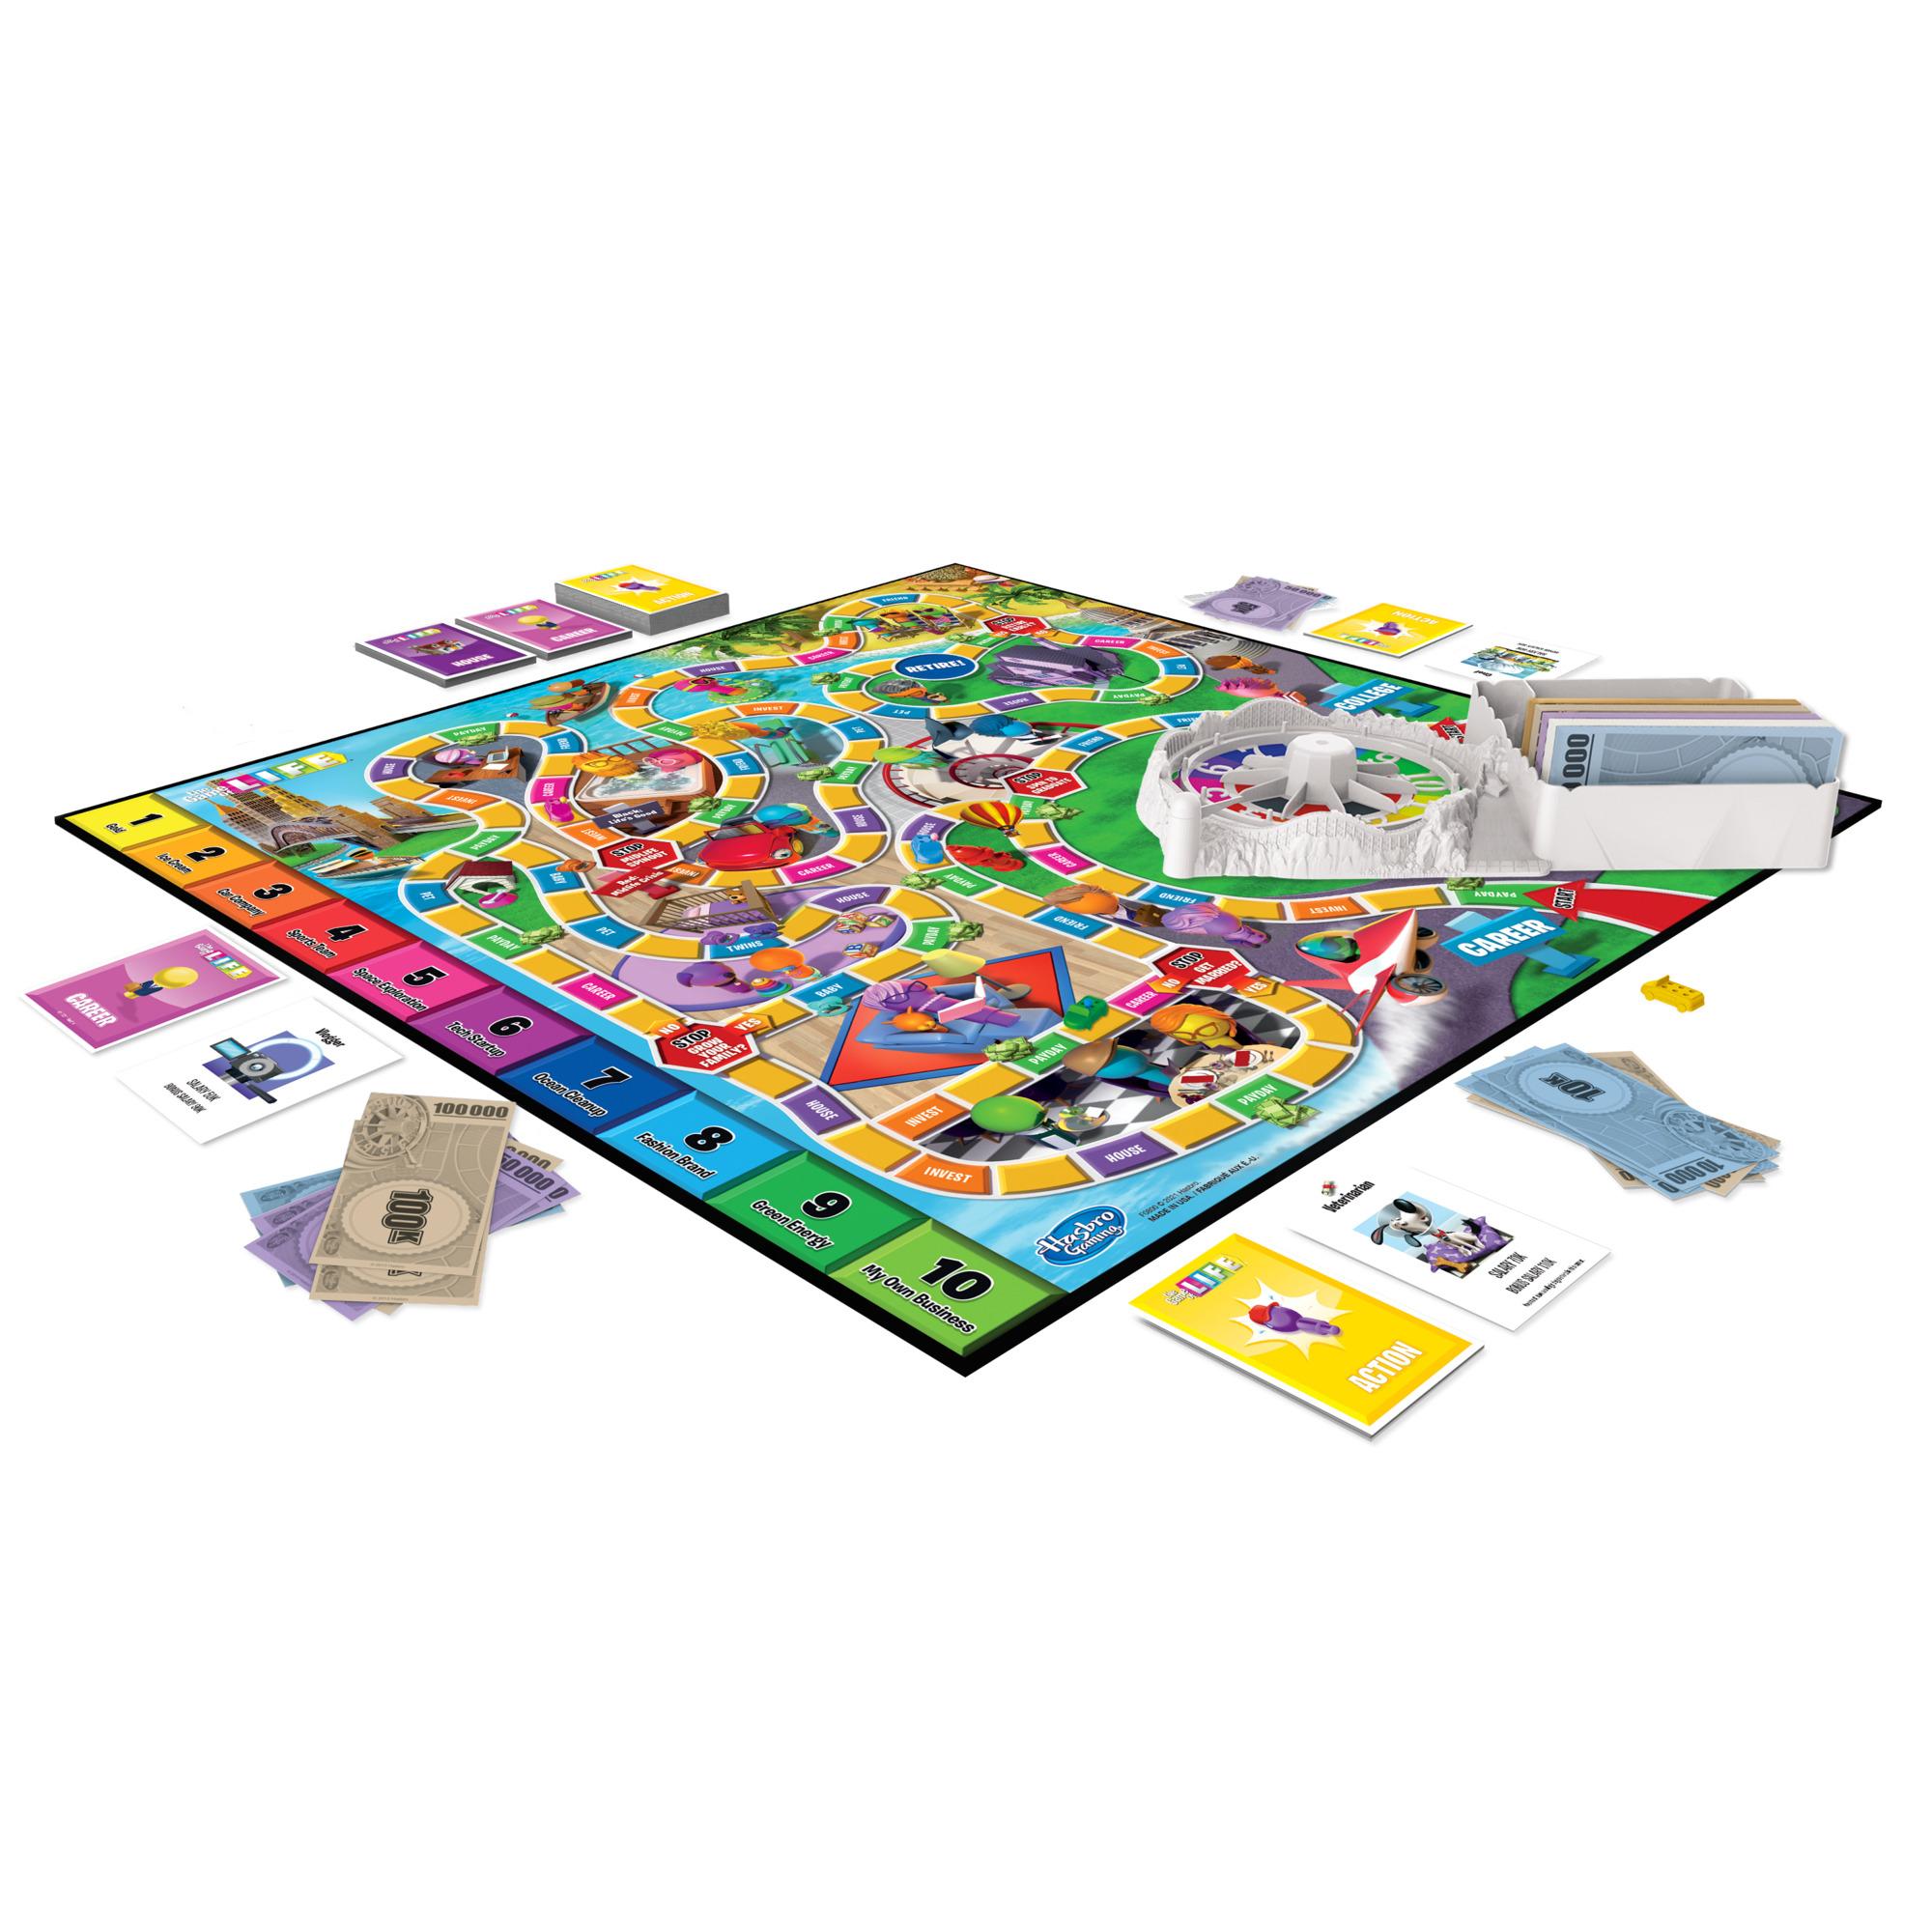 The Game of Life 2 – The perfect game for social distanced holiday